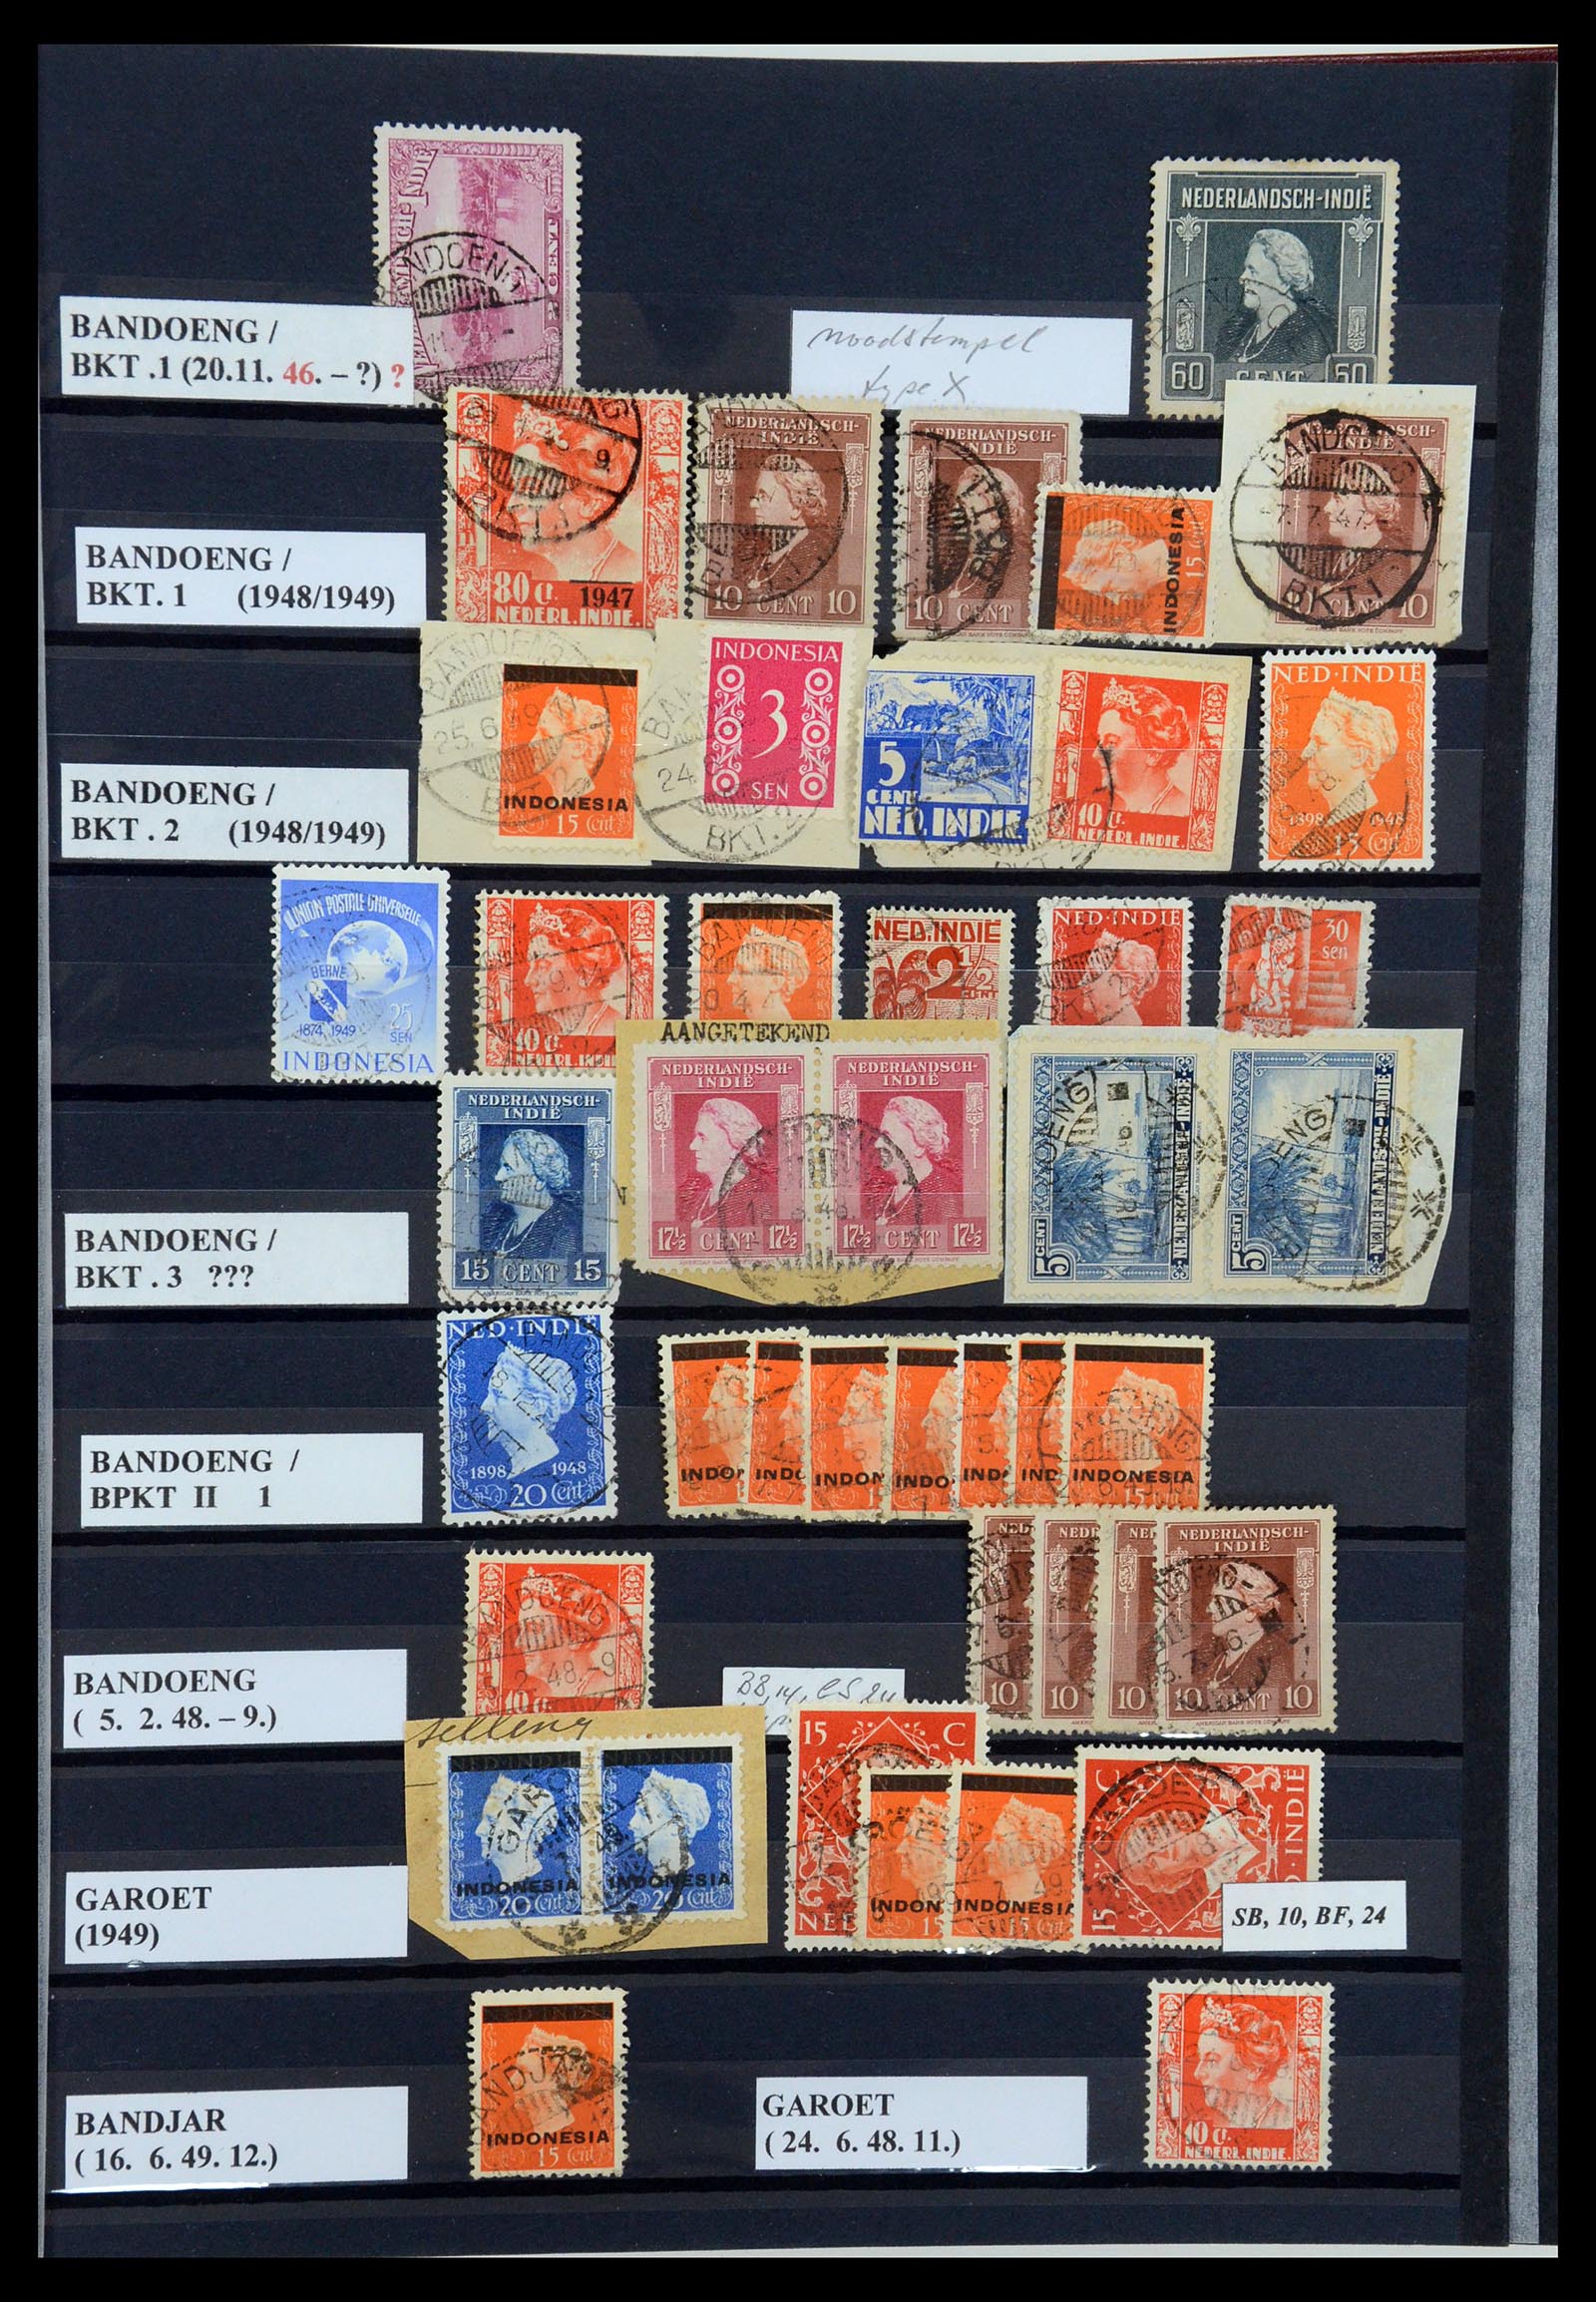 35612 073 - Stamp Collection 35612 Dutch east Indies cancels.